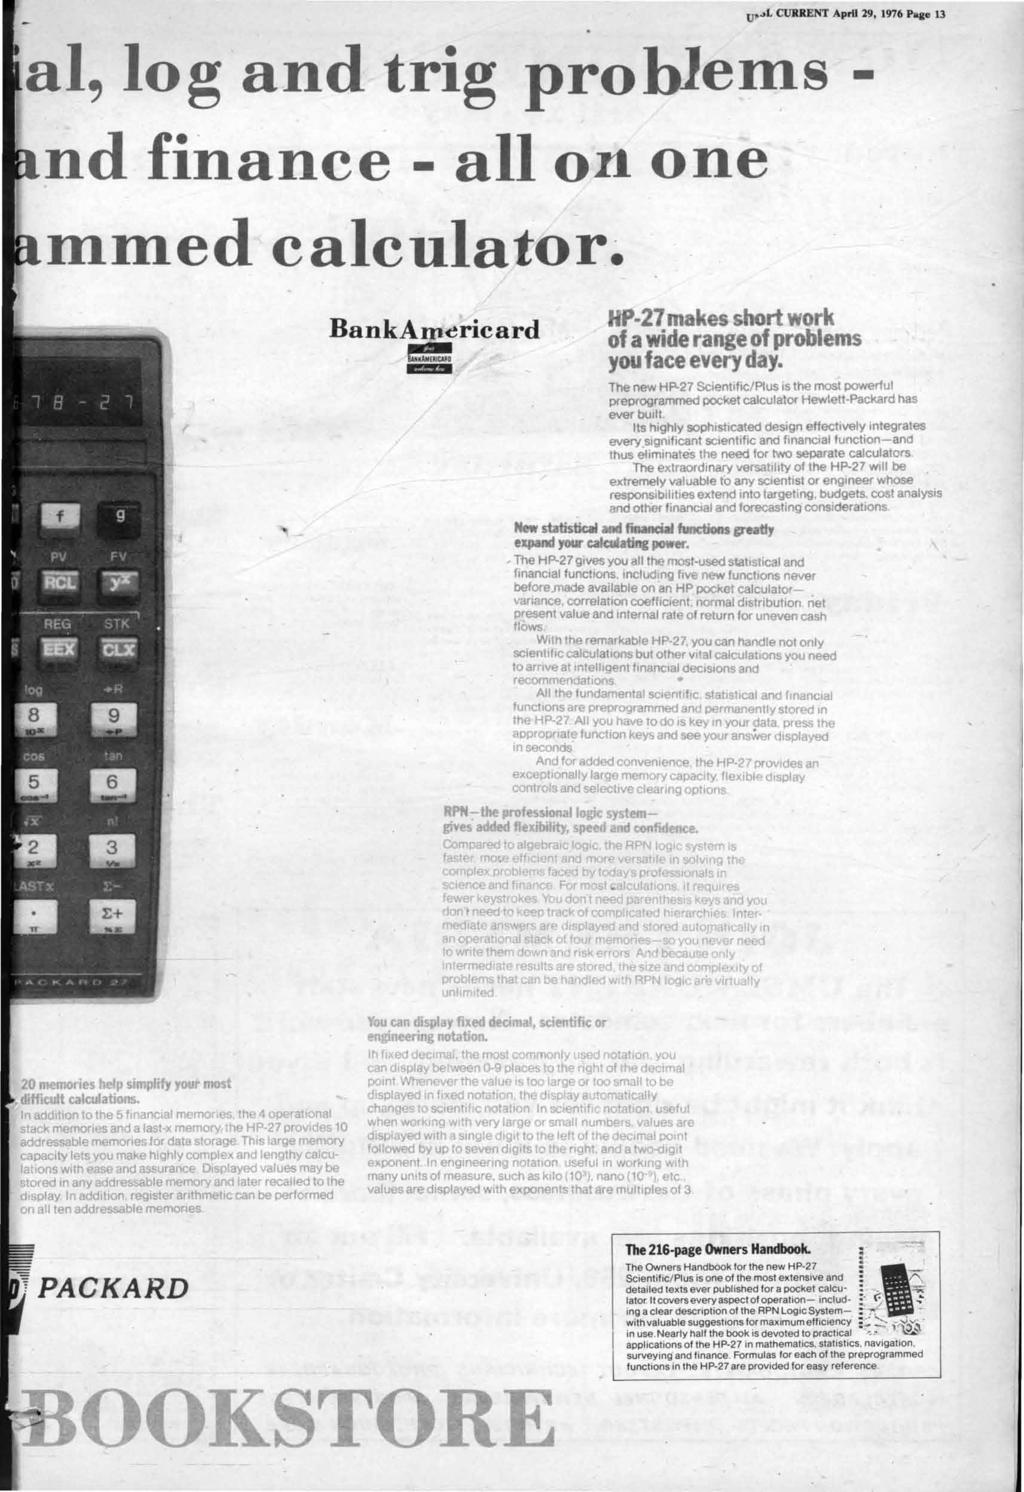 tpt.,l CURRENT April 29, 1976 PKge 13 ai, log and trig problellls - nd finance - all 011 one IIlllled calculator~ BankAwericard ' BAHKAMERICAlID 27 s rt rk of a de ra ge of problems you face every d